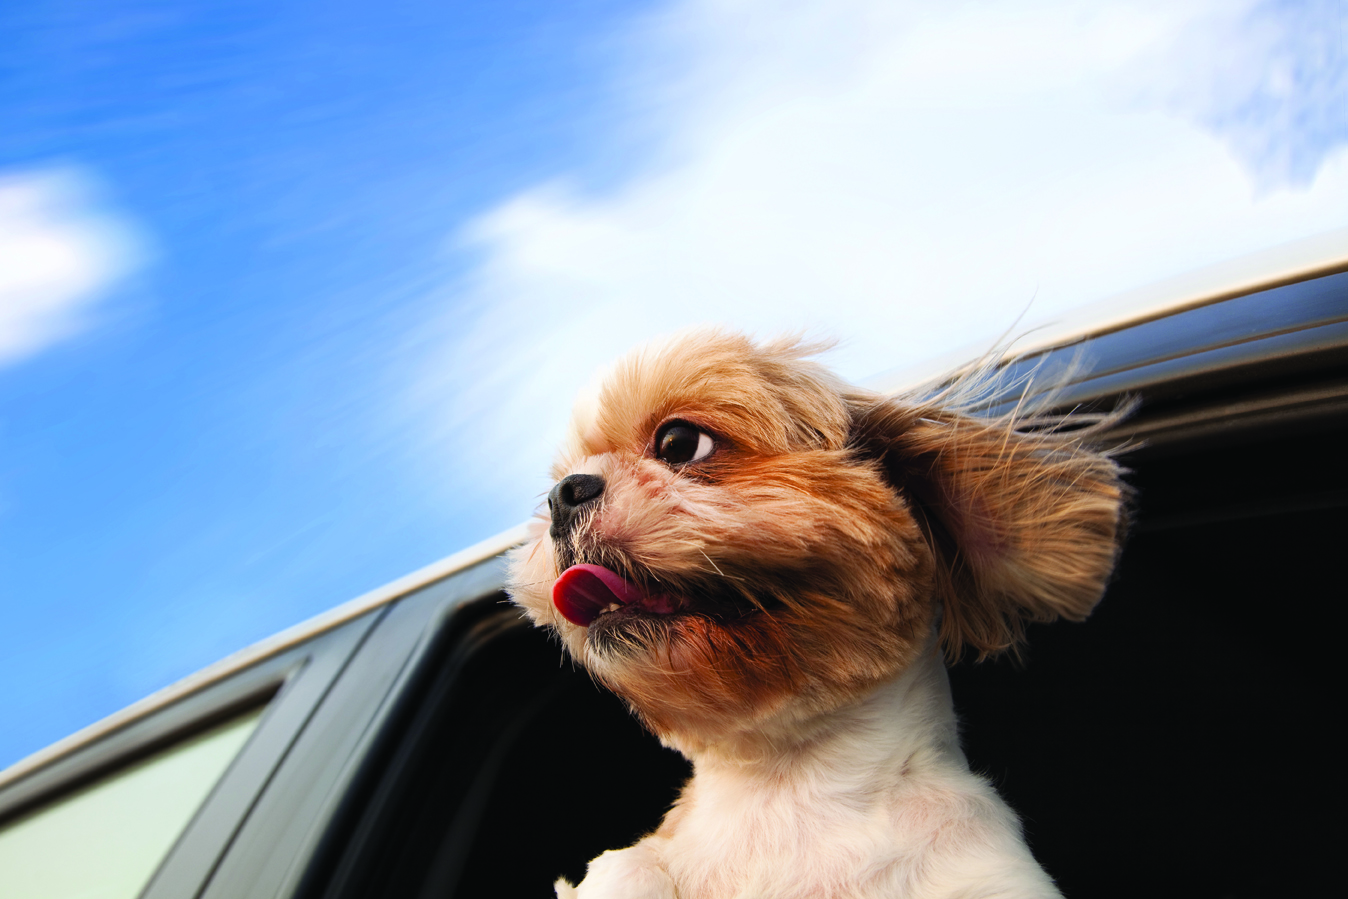 Pets Injured in a Car Accidents - What Can You Do?